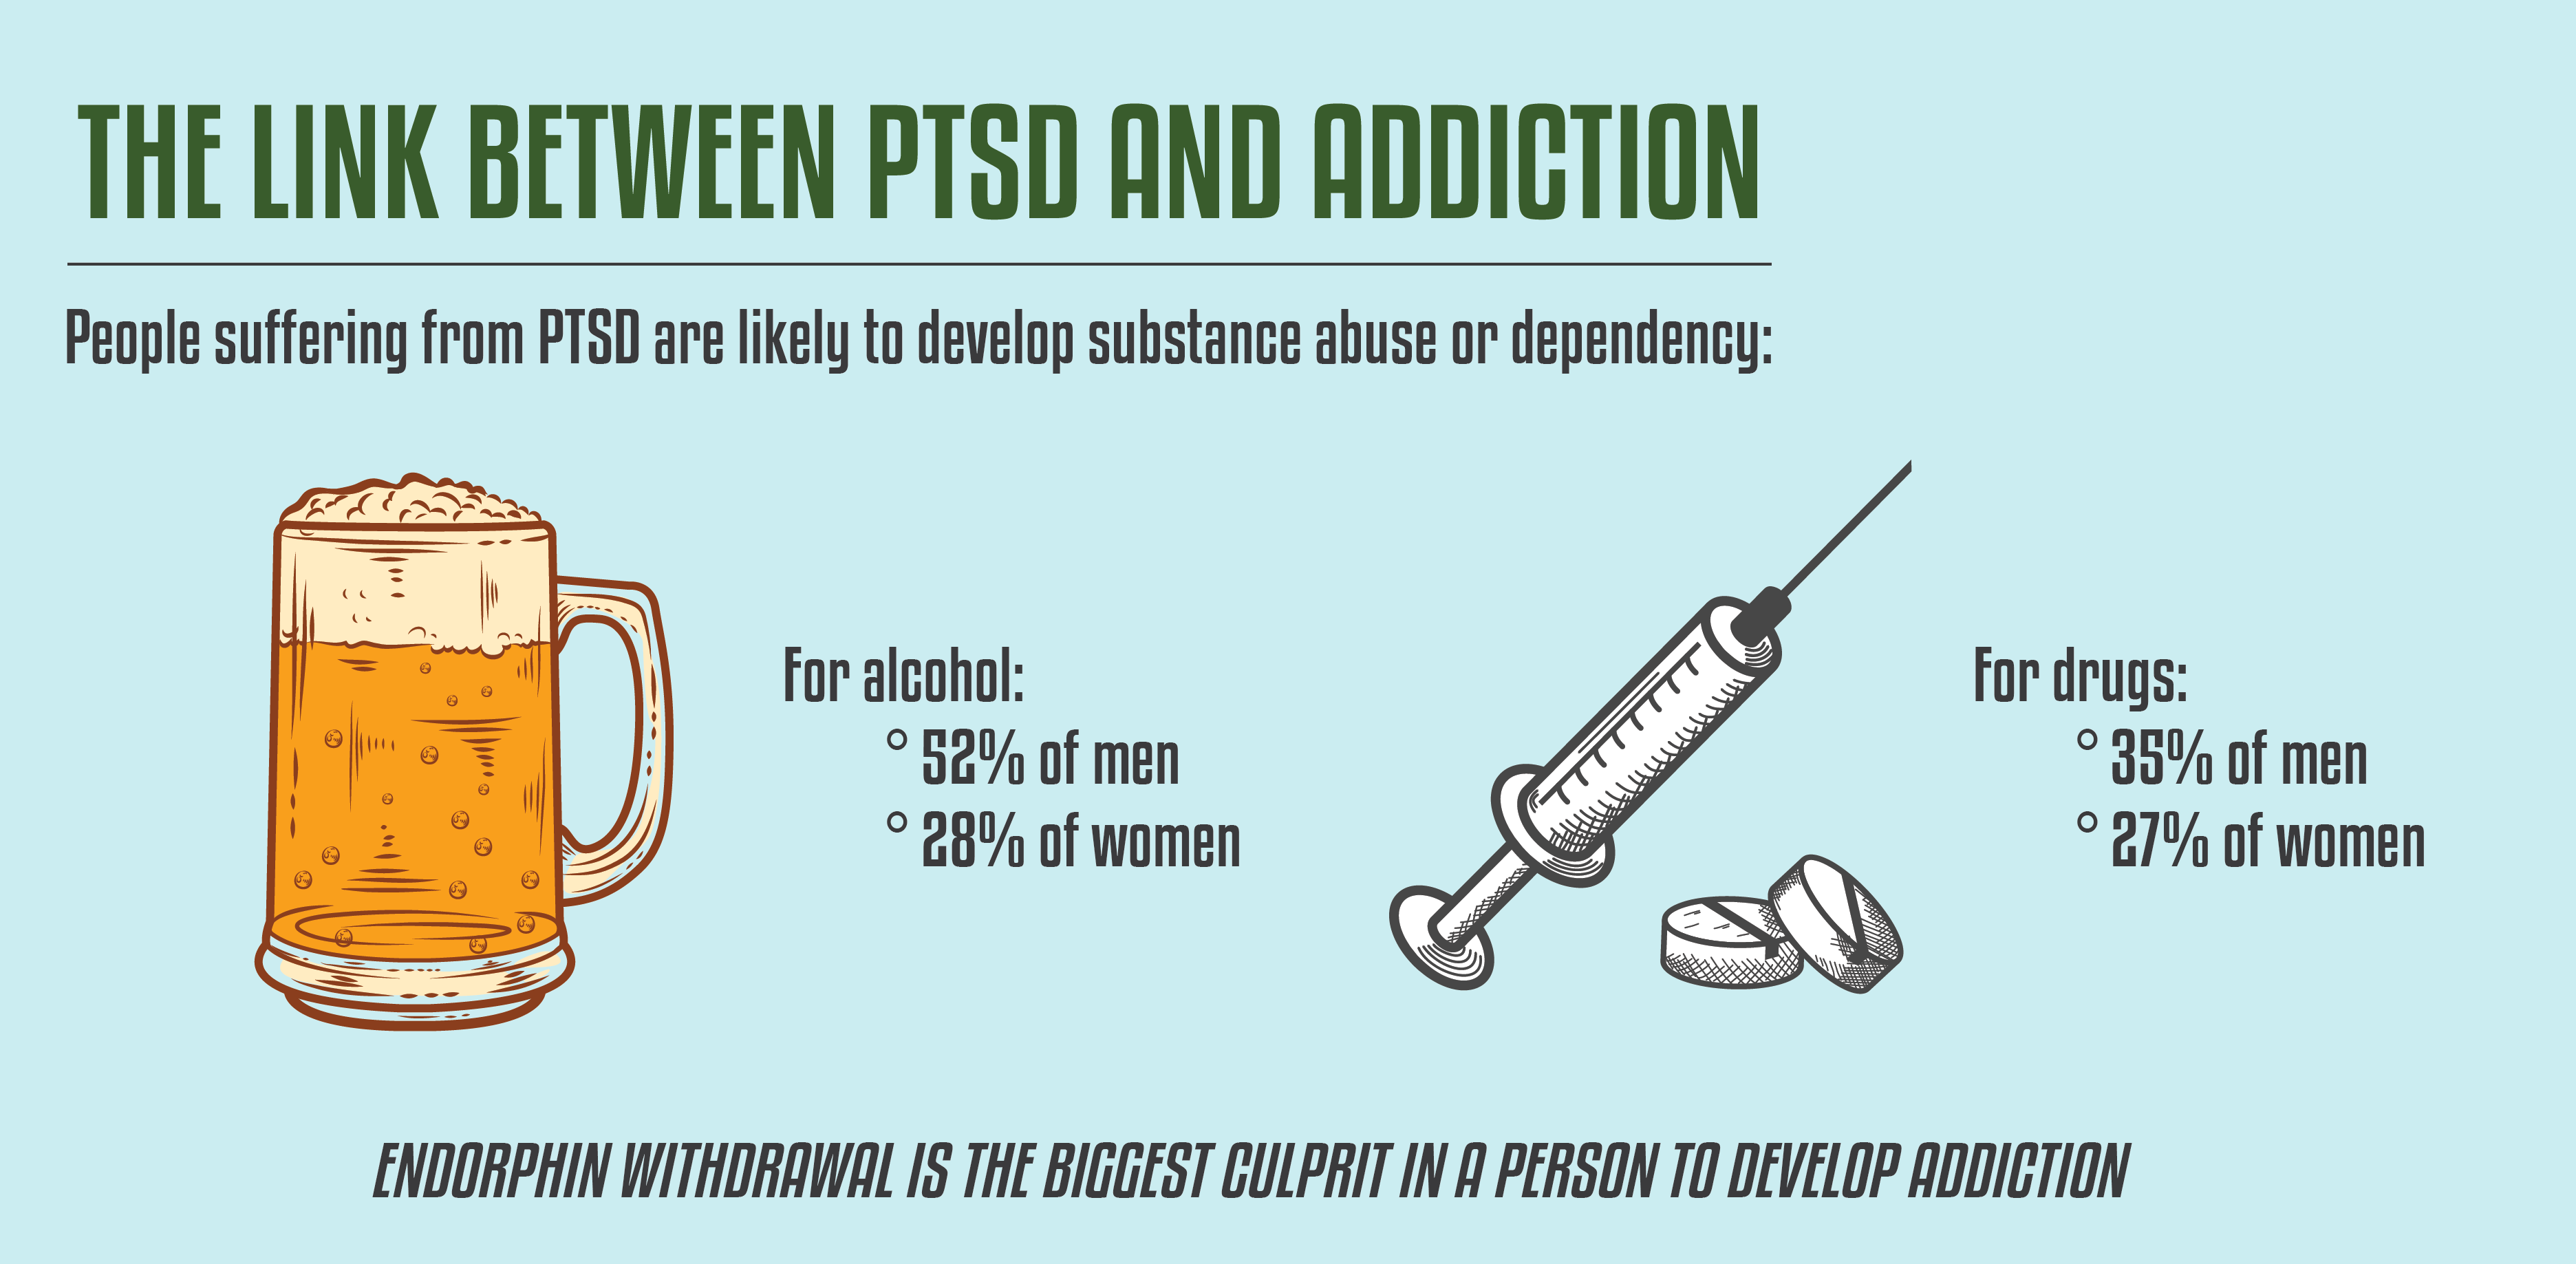 Link Between PTSD and Addiction